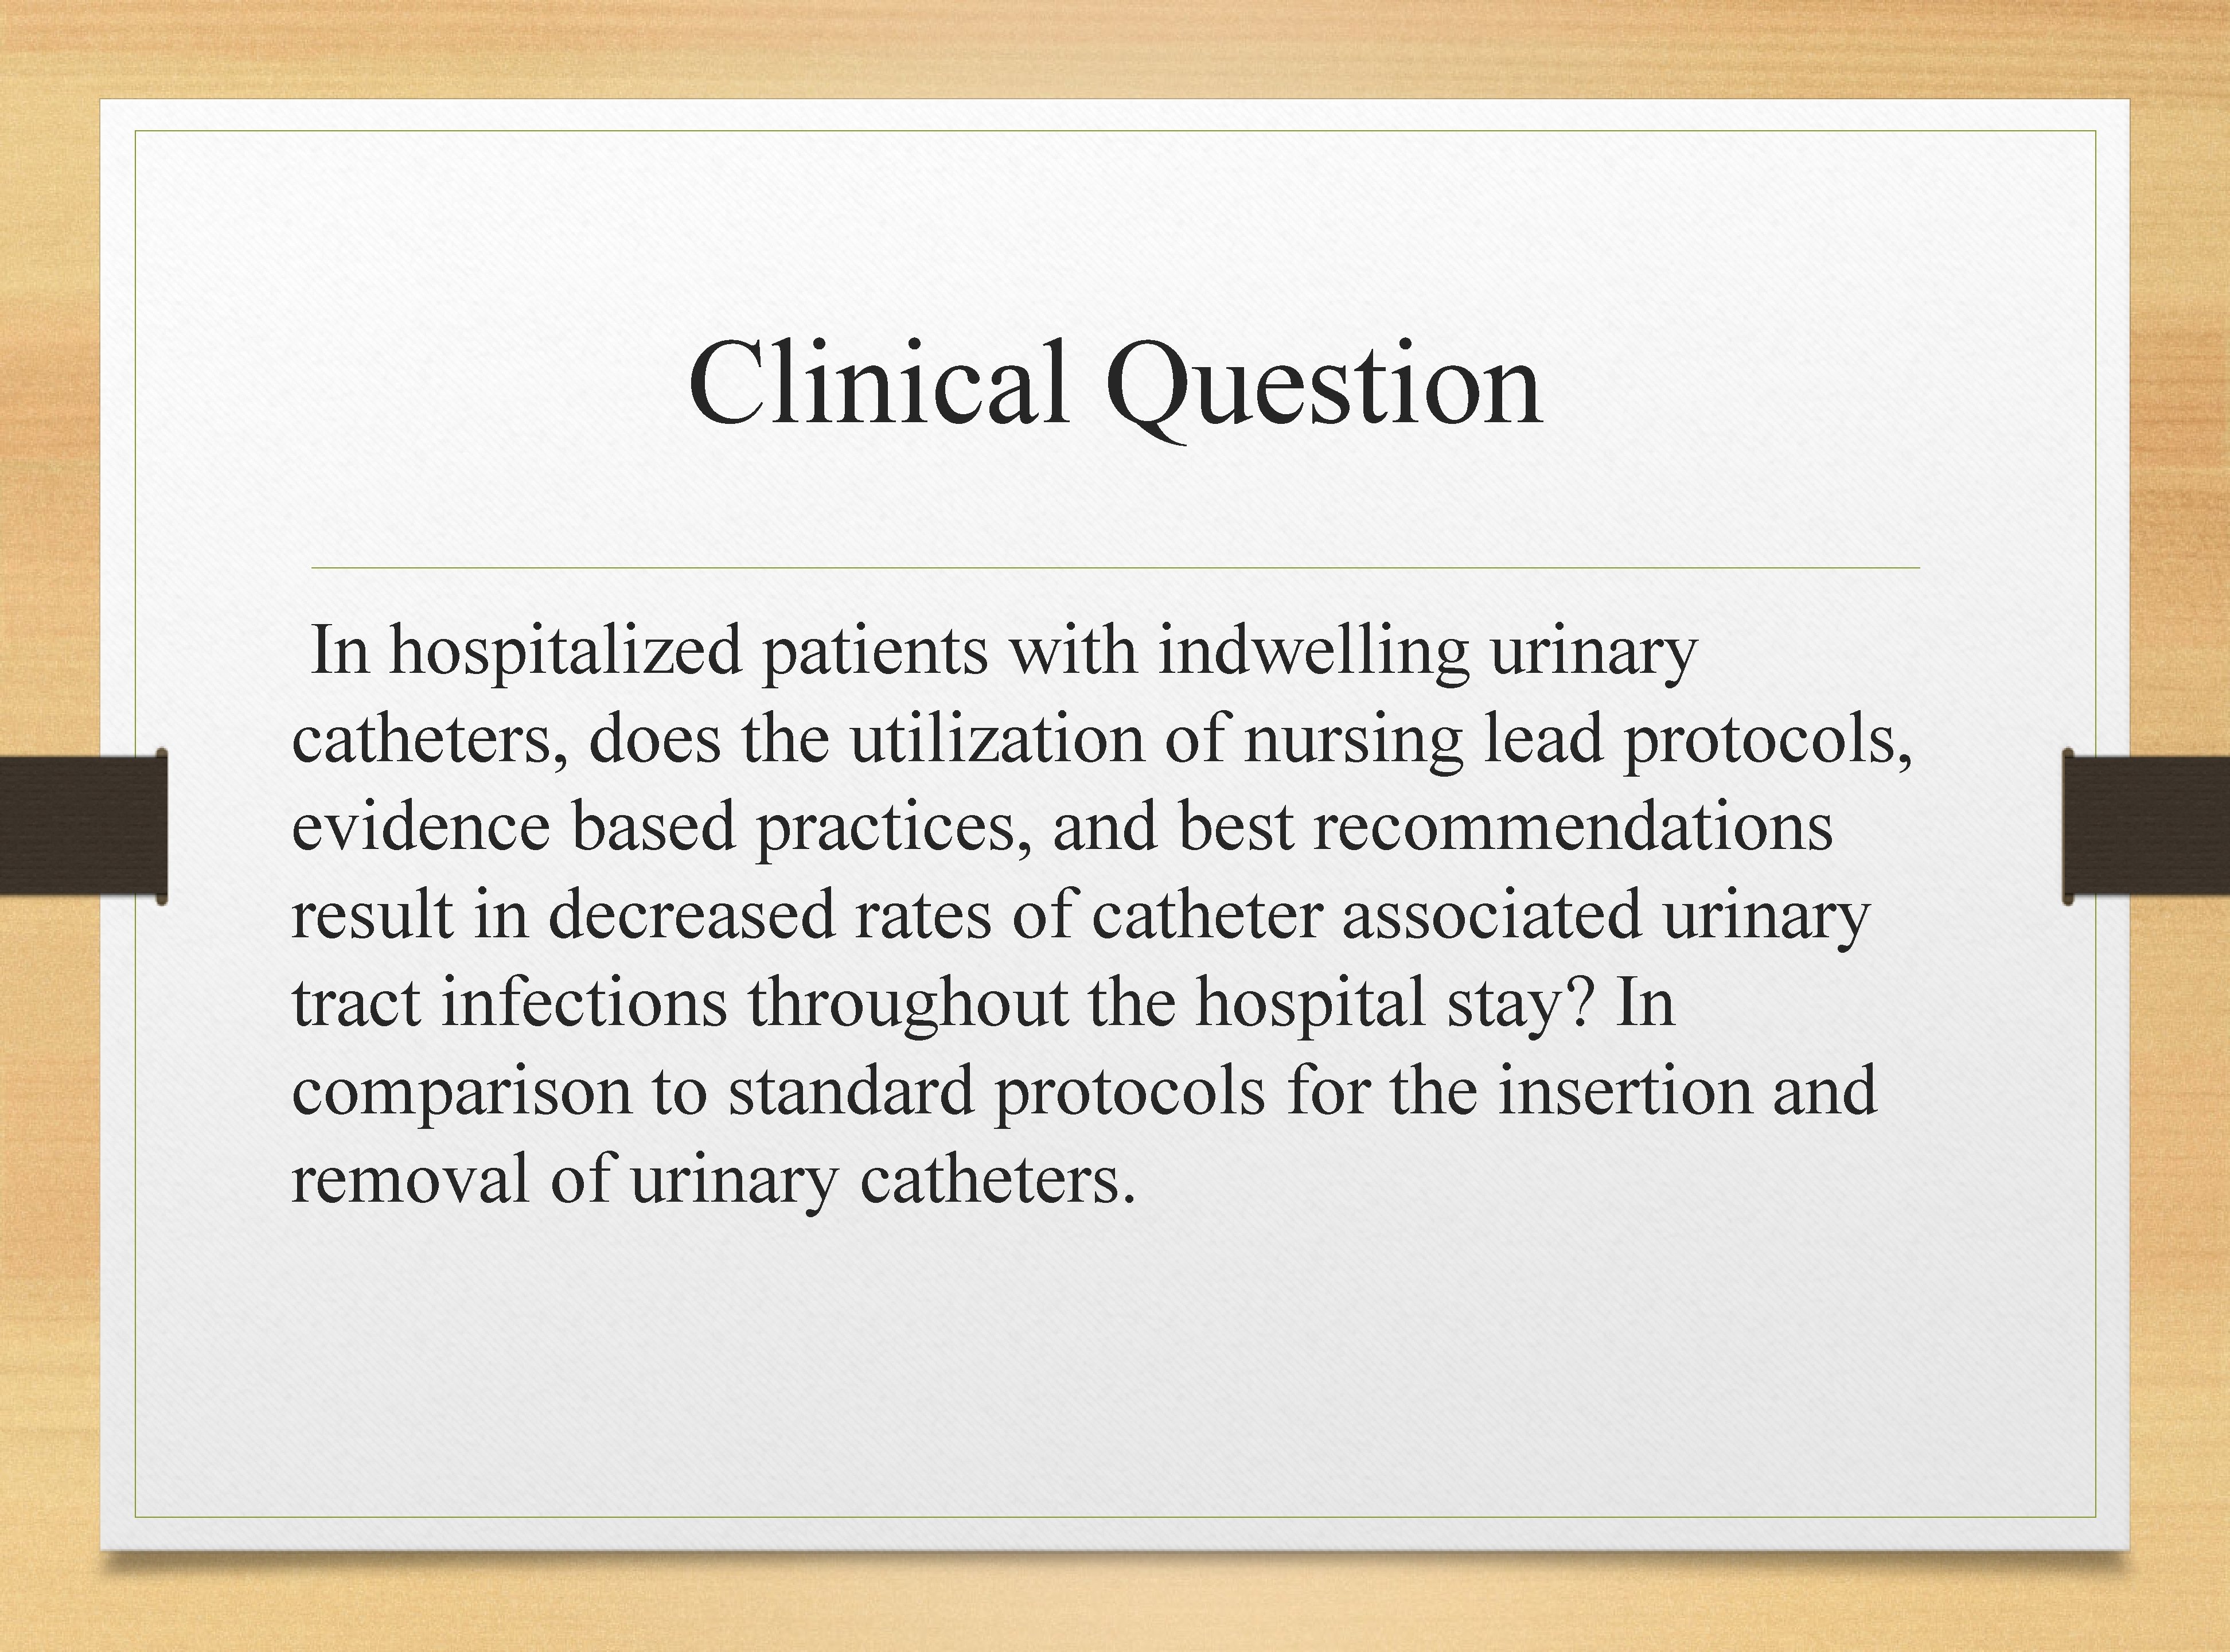 Clinical Question In hospitalized patients with indwelling urinary catheters, does the utilization of nursing